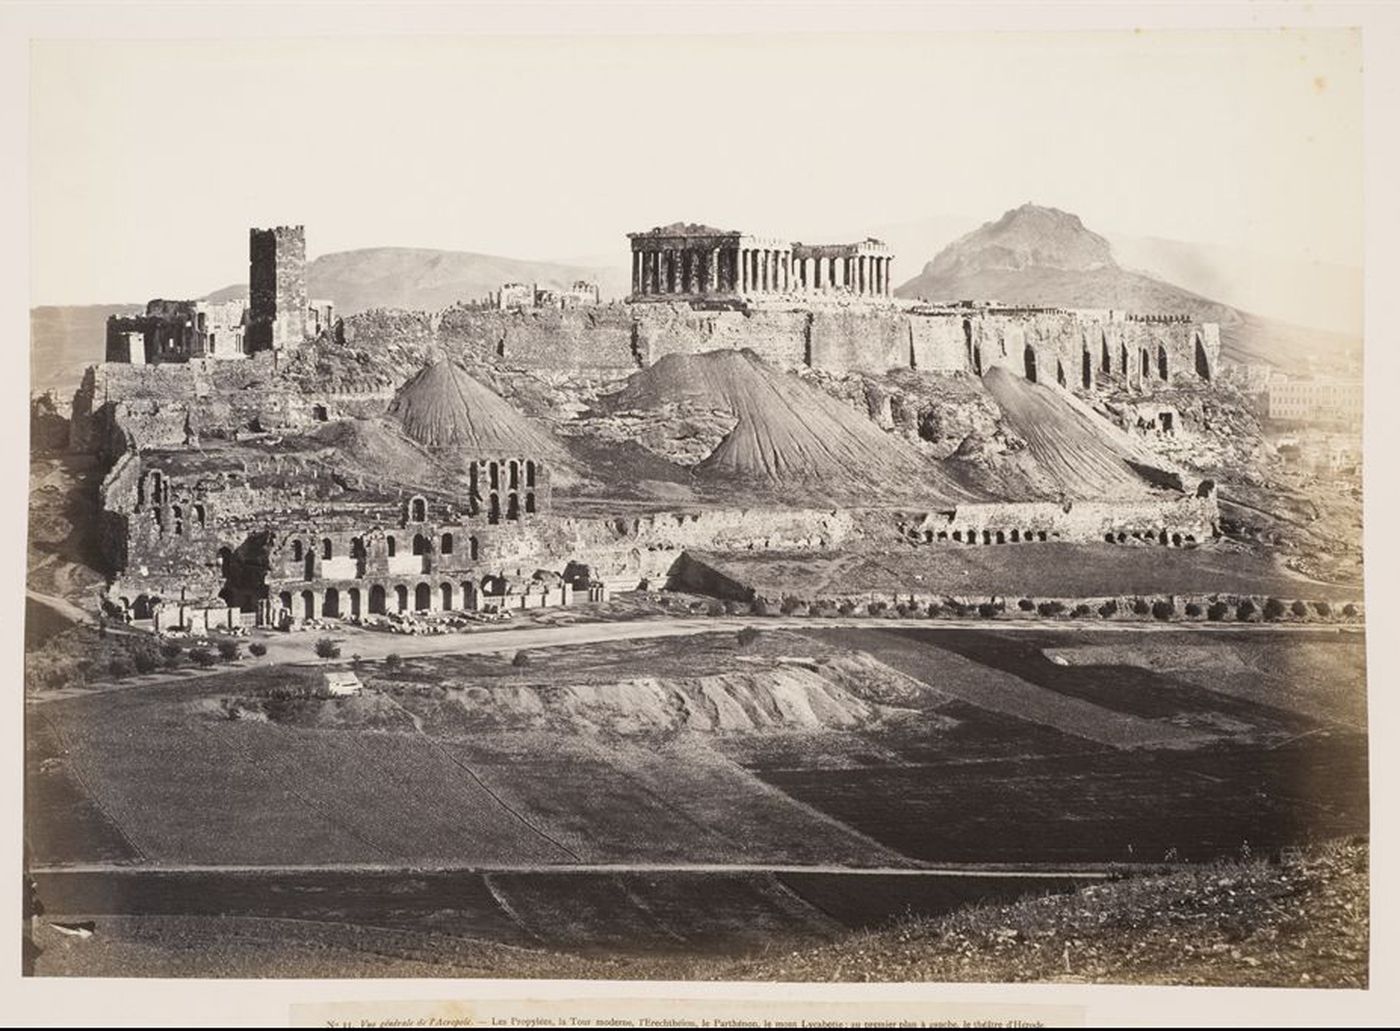 General view of the Acropolis of Athens, Greece